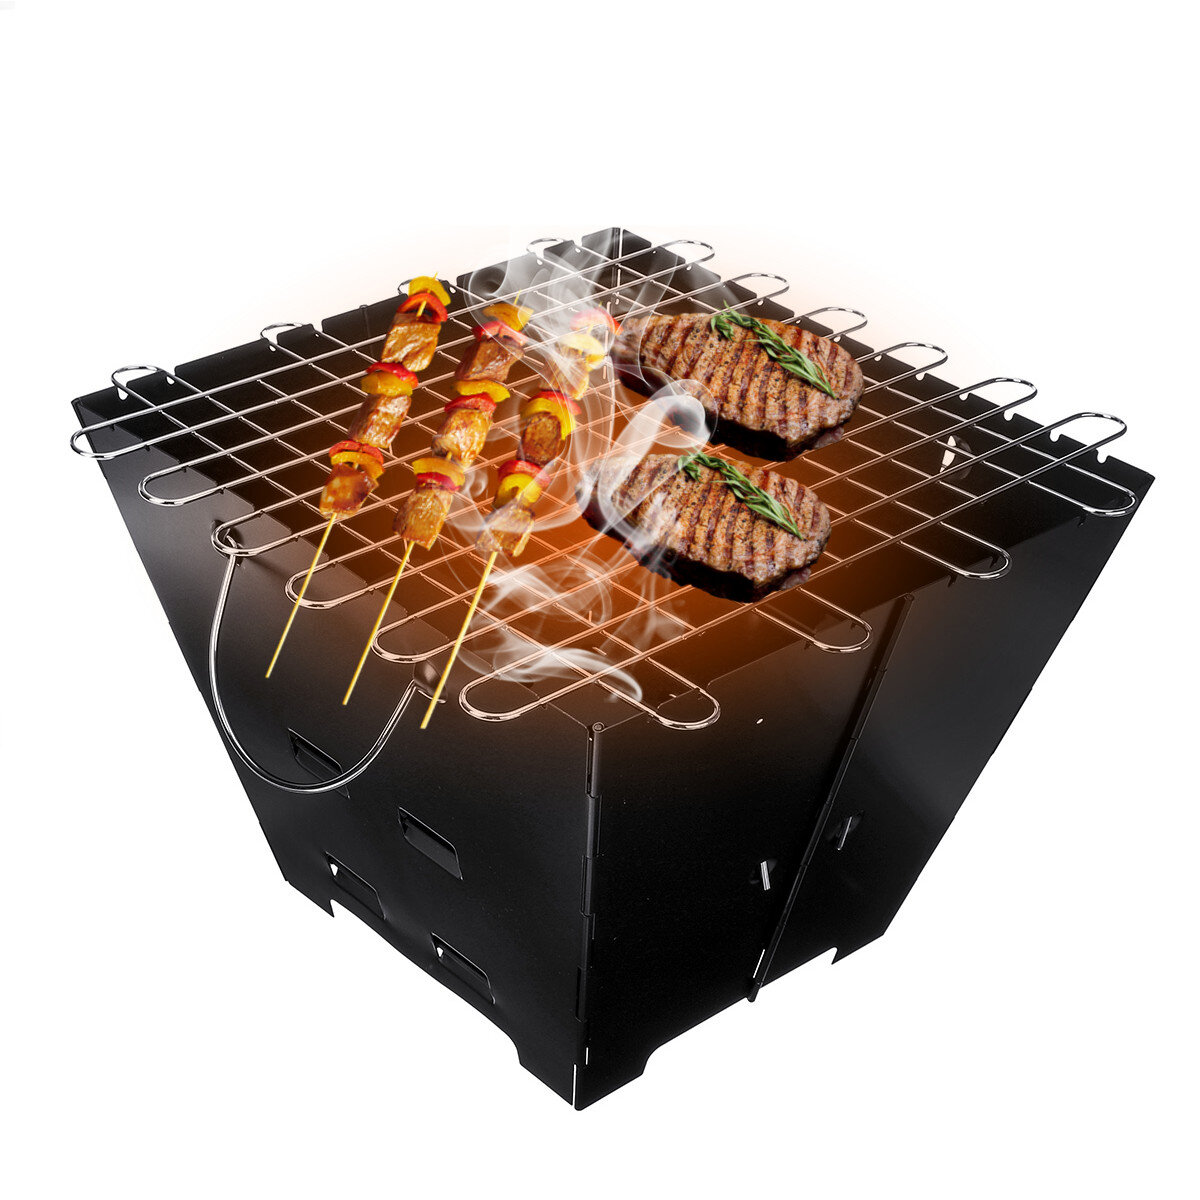 Outdoor BBQ Grill Opvouwbare houtskooloven Camping Picknick Oven Roestvrijstalen fornuis